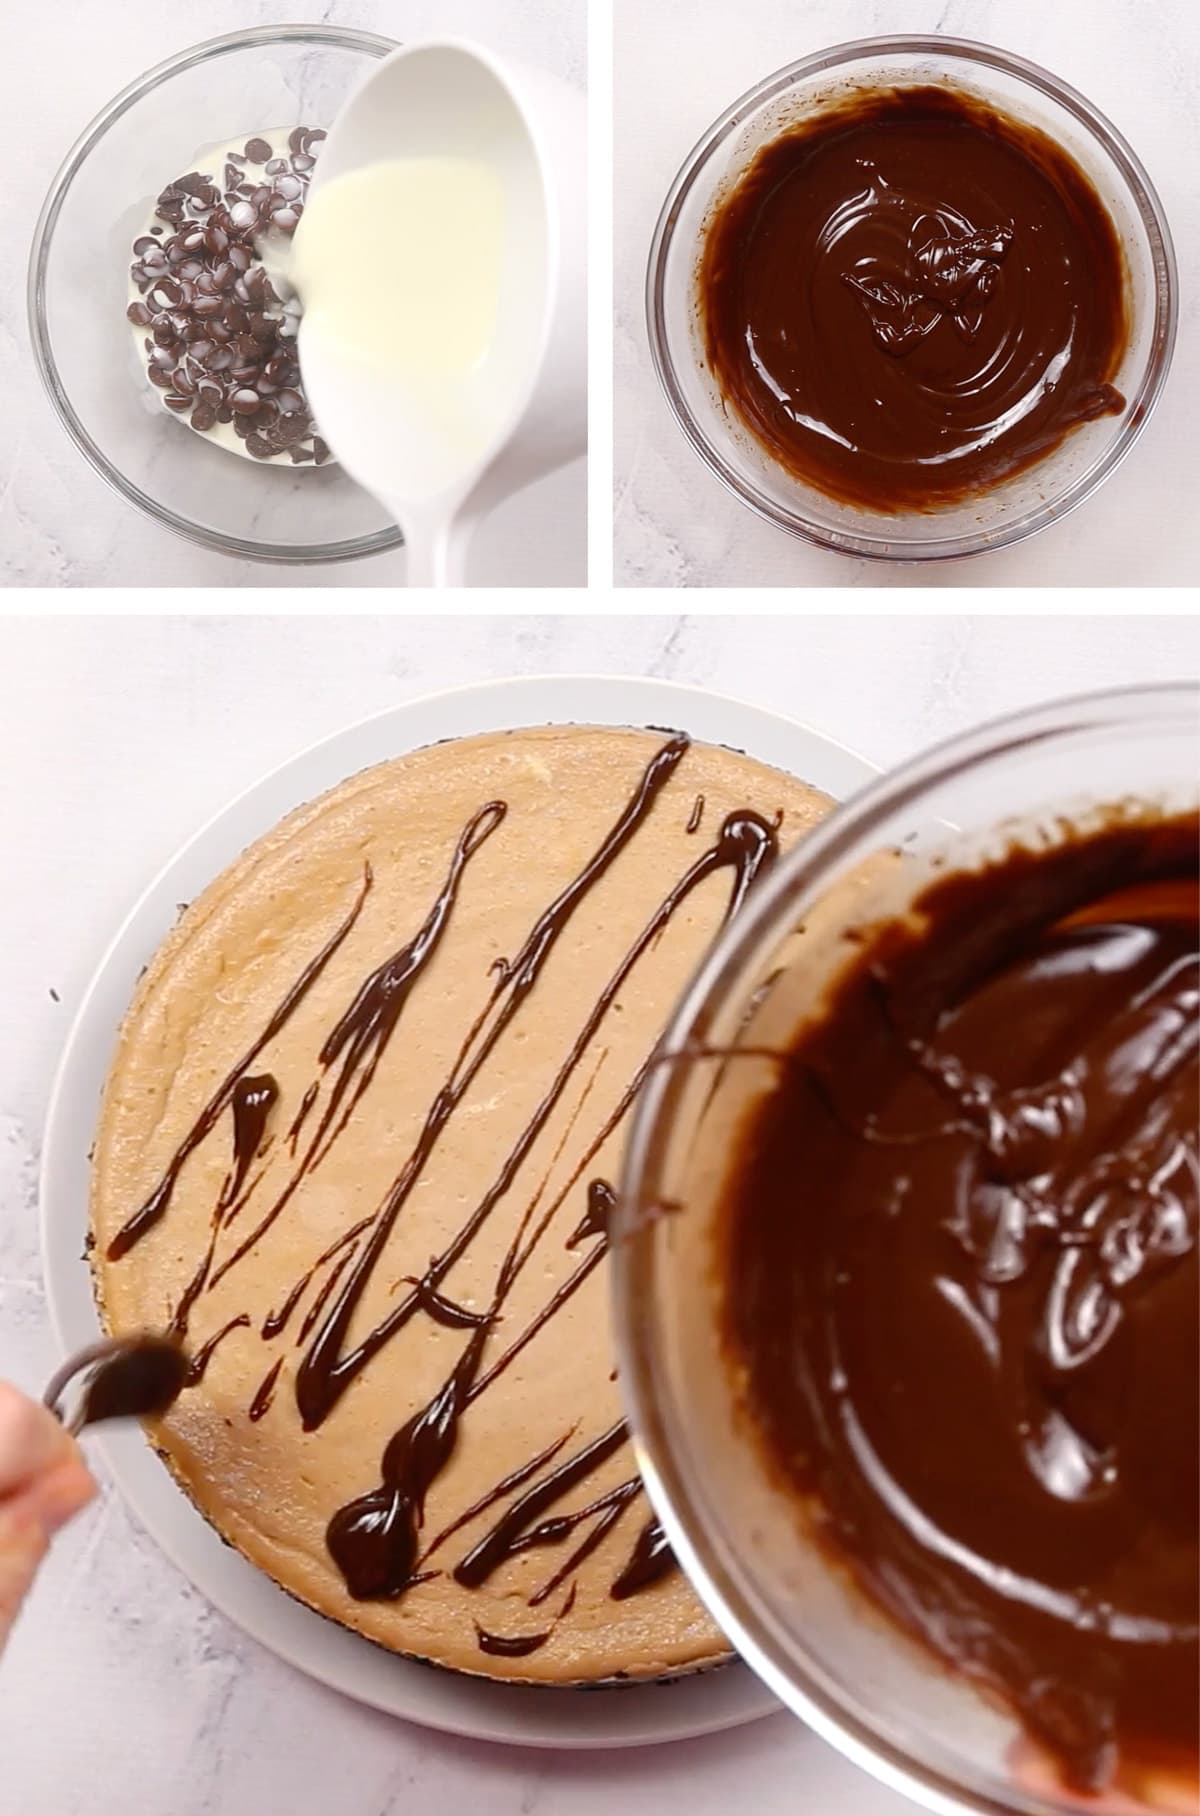 Chocolate chips with hpw cream in a bowl, then in a bowl after being mixed, then showing the chocolate ganache being poured onto the cheesecake.